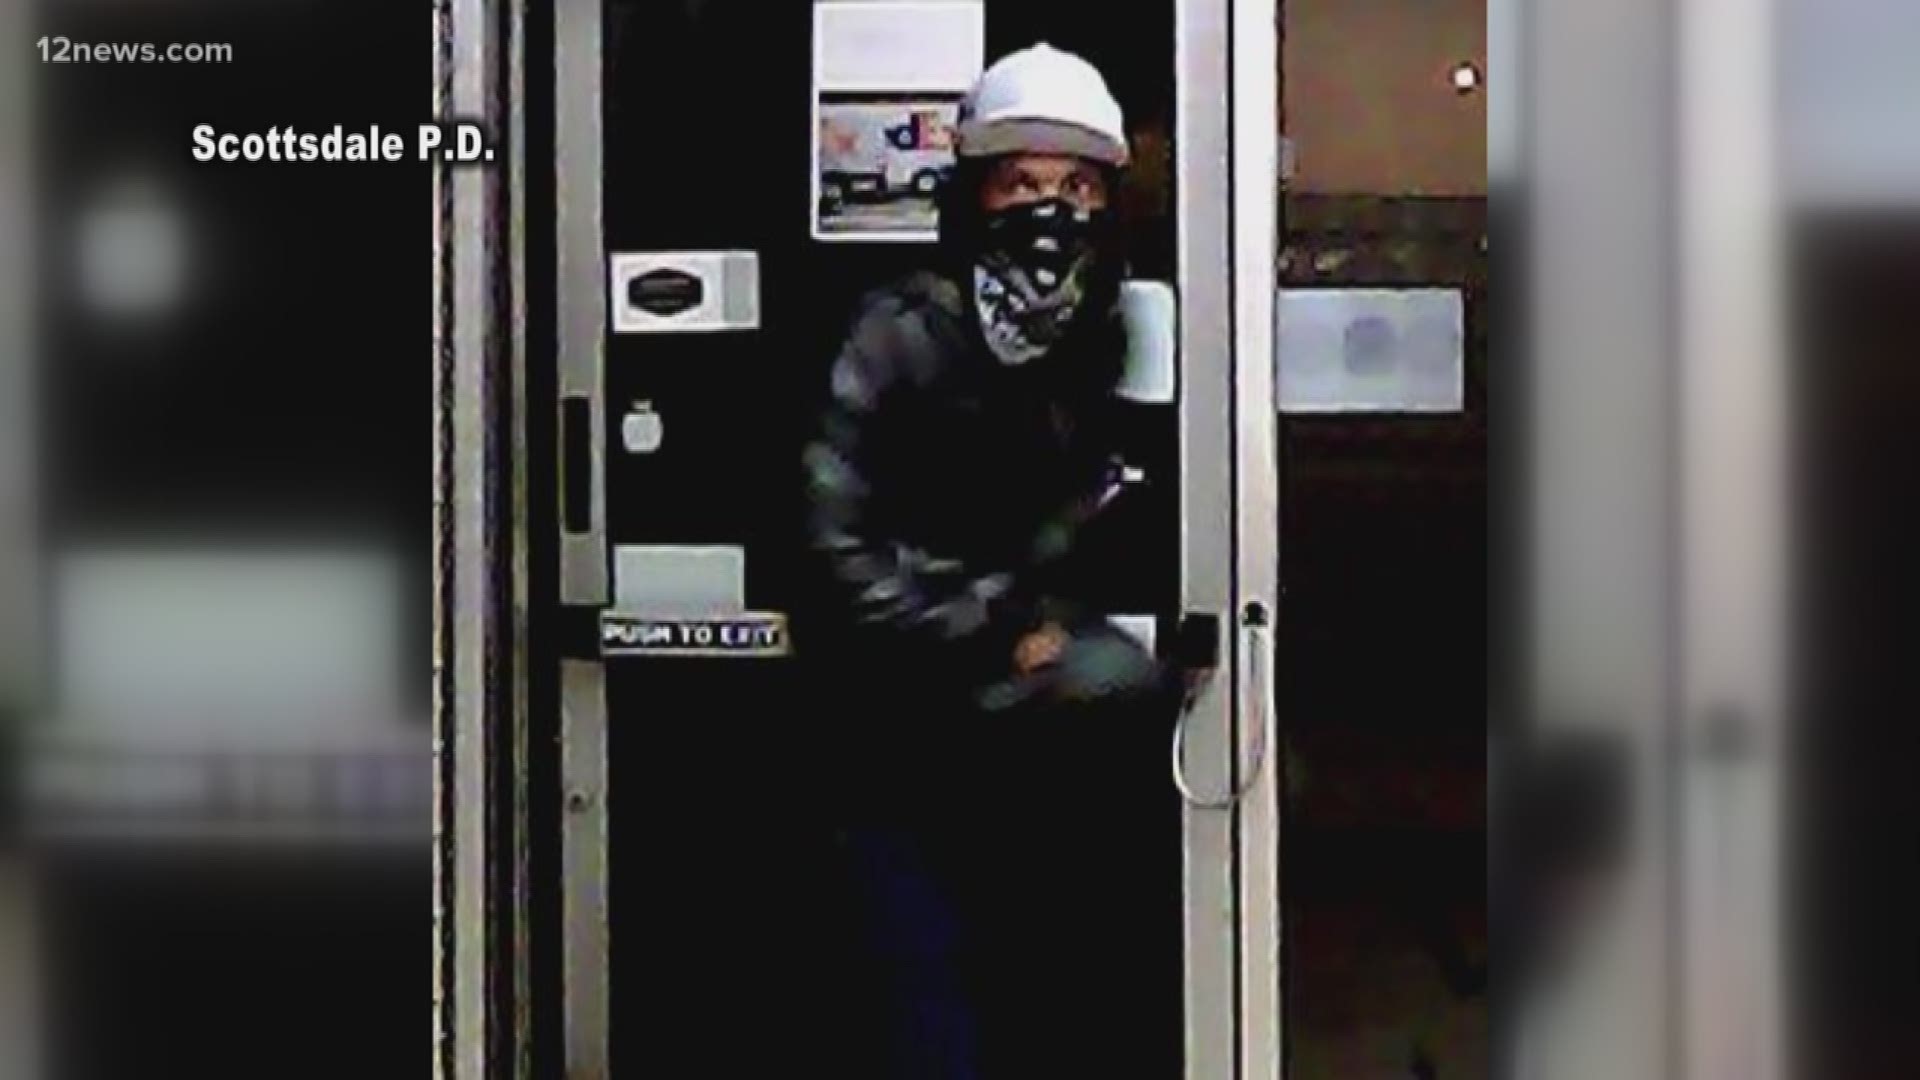 The suspect stole a guitar, an amplifier and some office equipment from a mail services business in Scottsdale. If you have any information call Silent Witness at 480-witness.